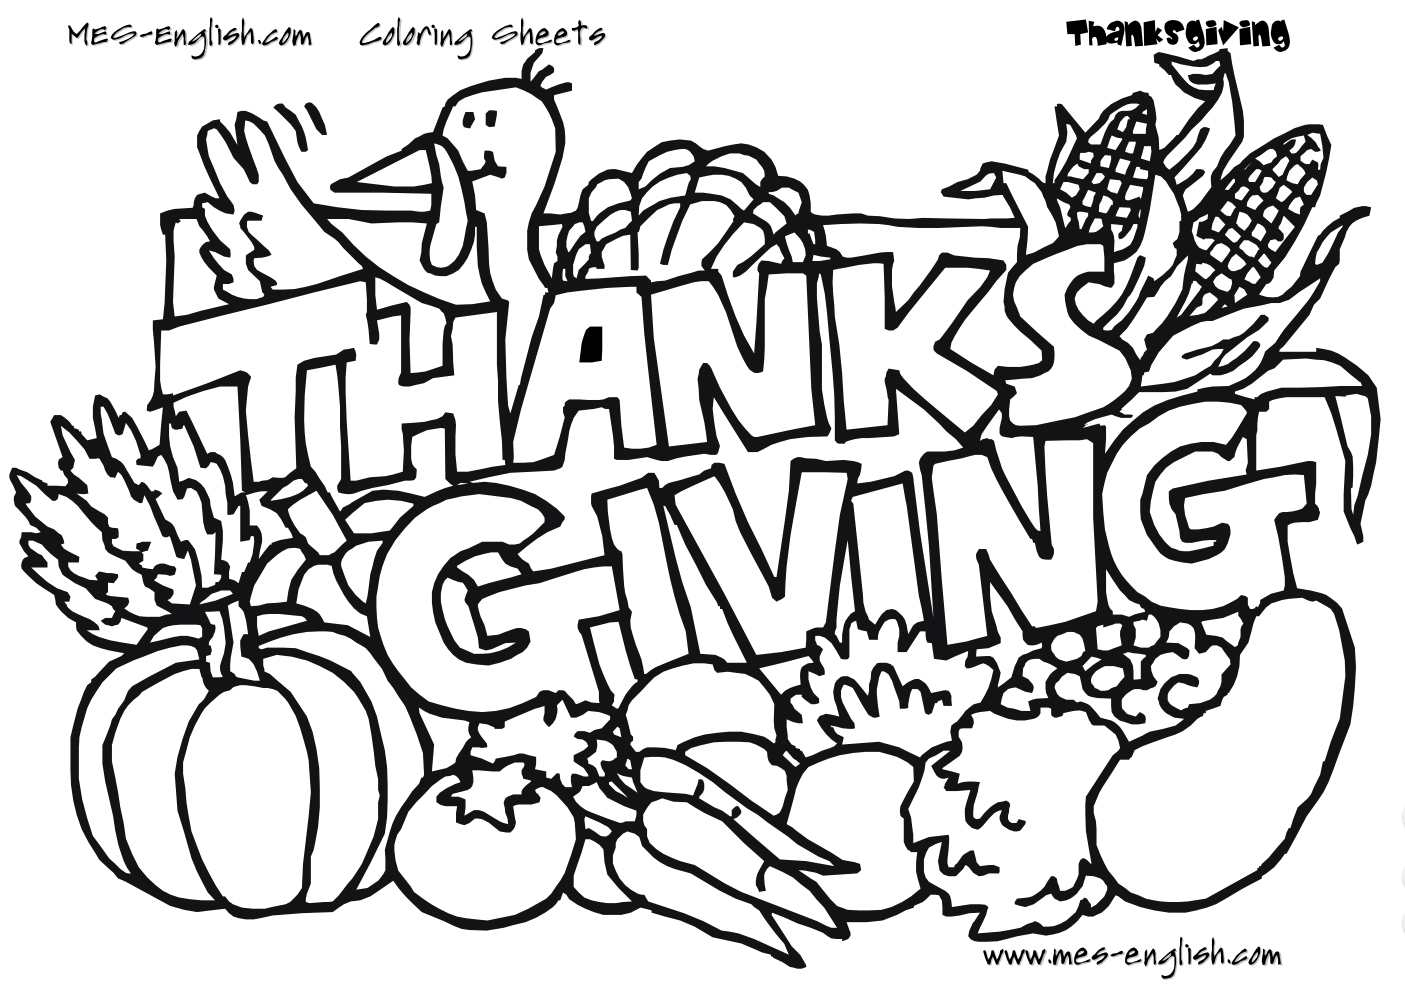 Free Thanksgiving Coloring Pages For Kids - Free Printable Thanksgiving Coloring Pages